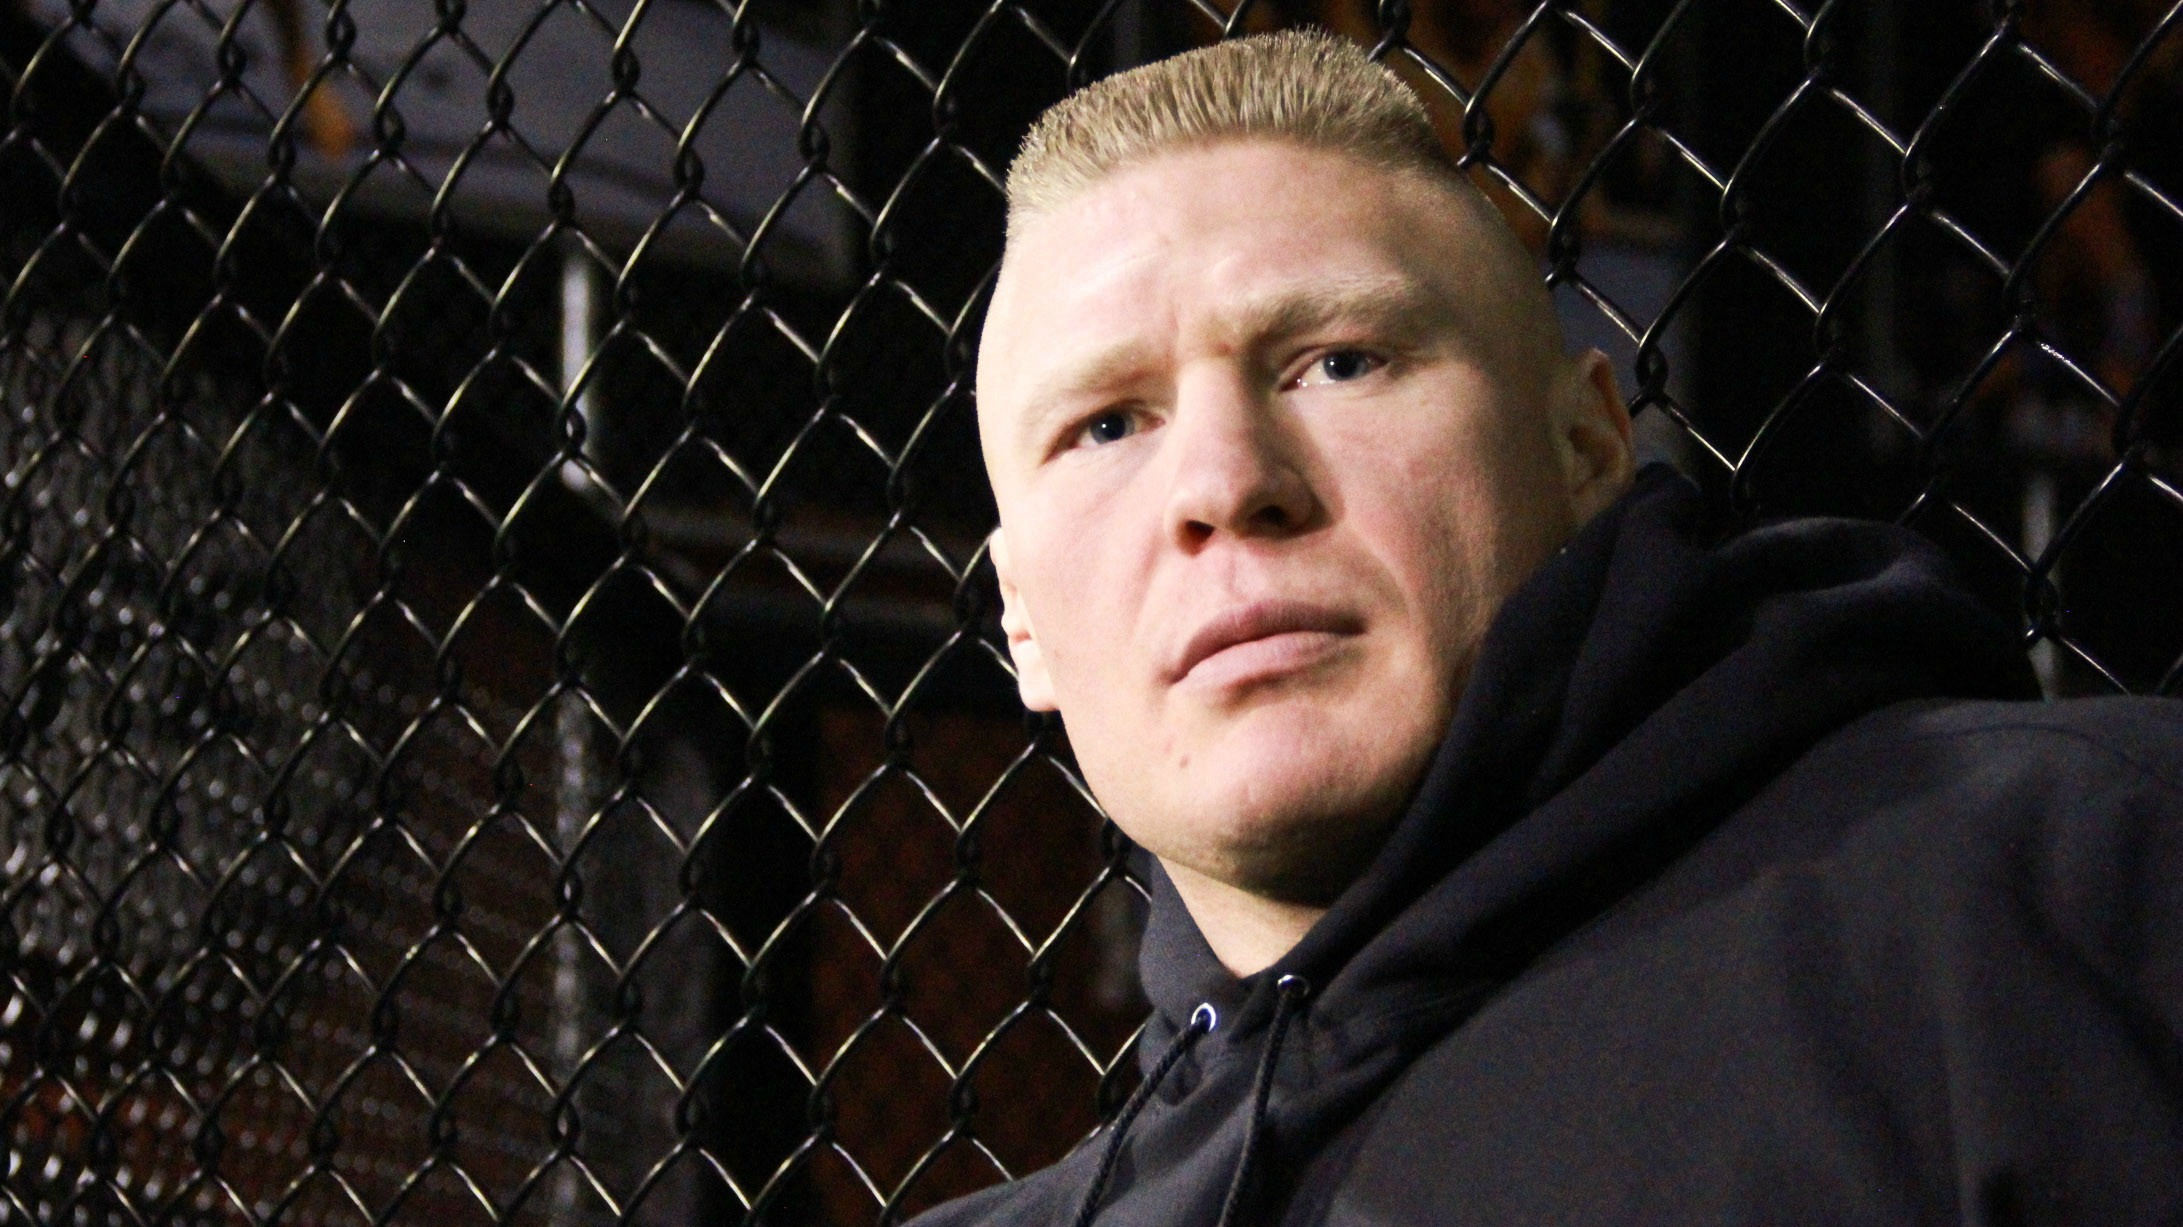 Wwe Fighter Brock Lesnar Noramal Photo Daily Pics Update